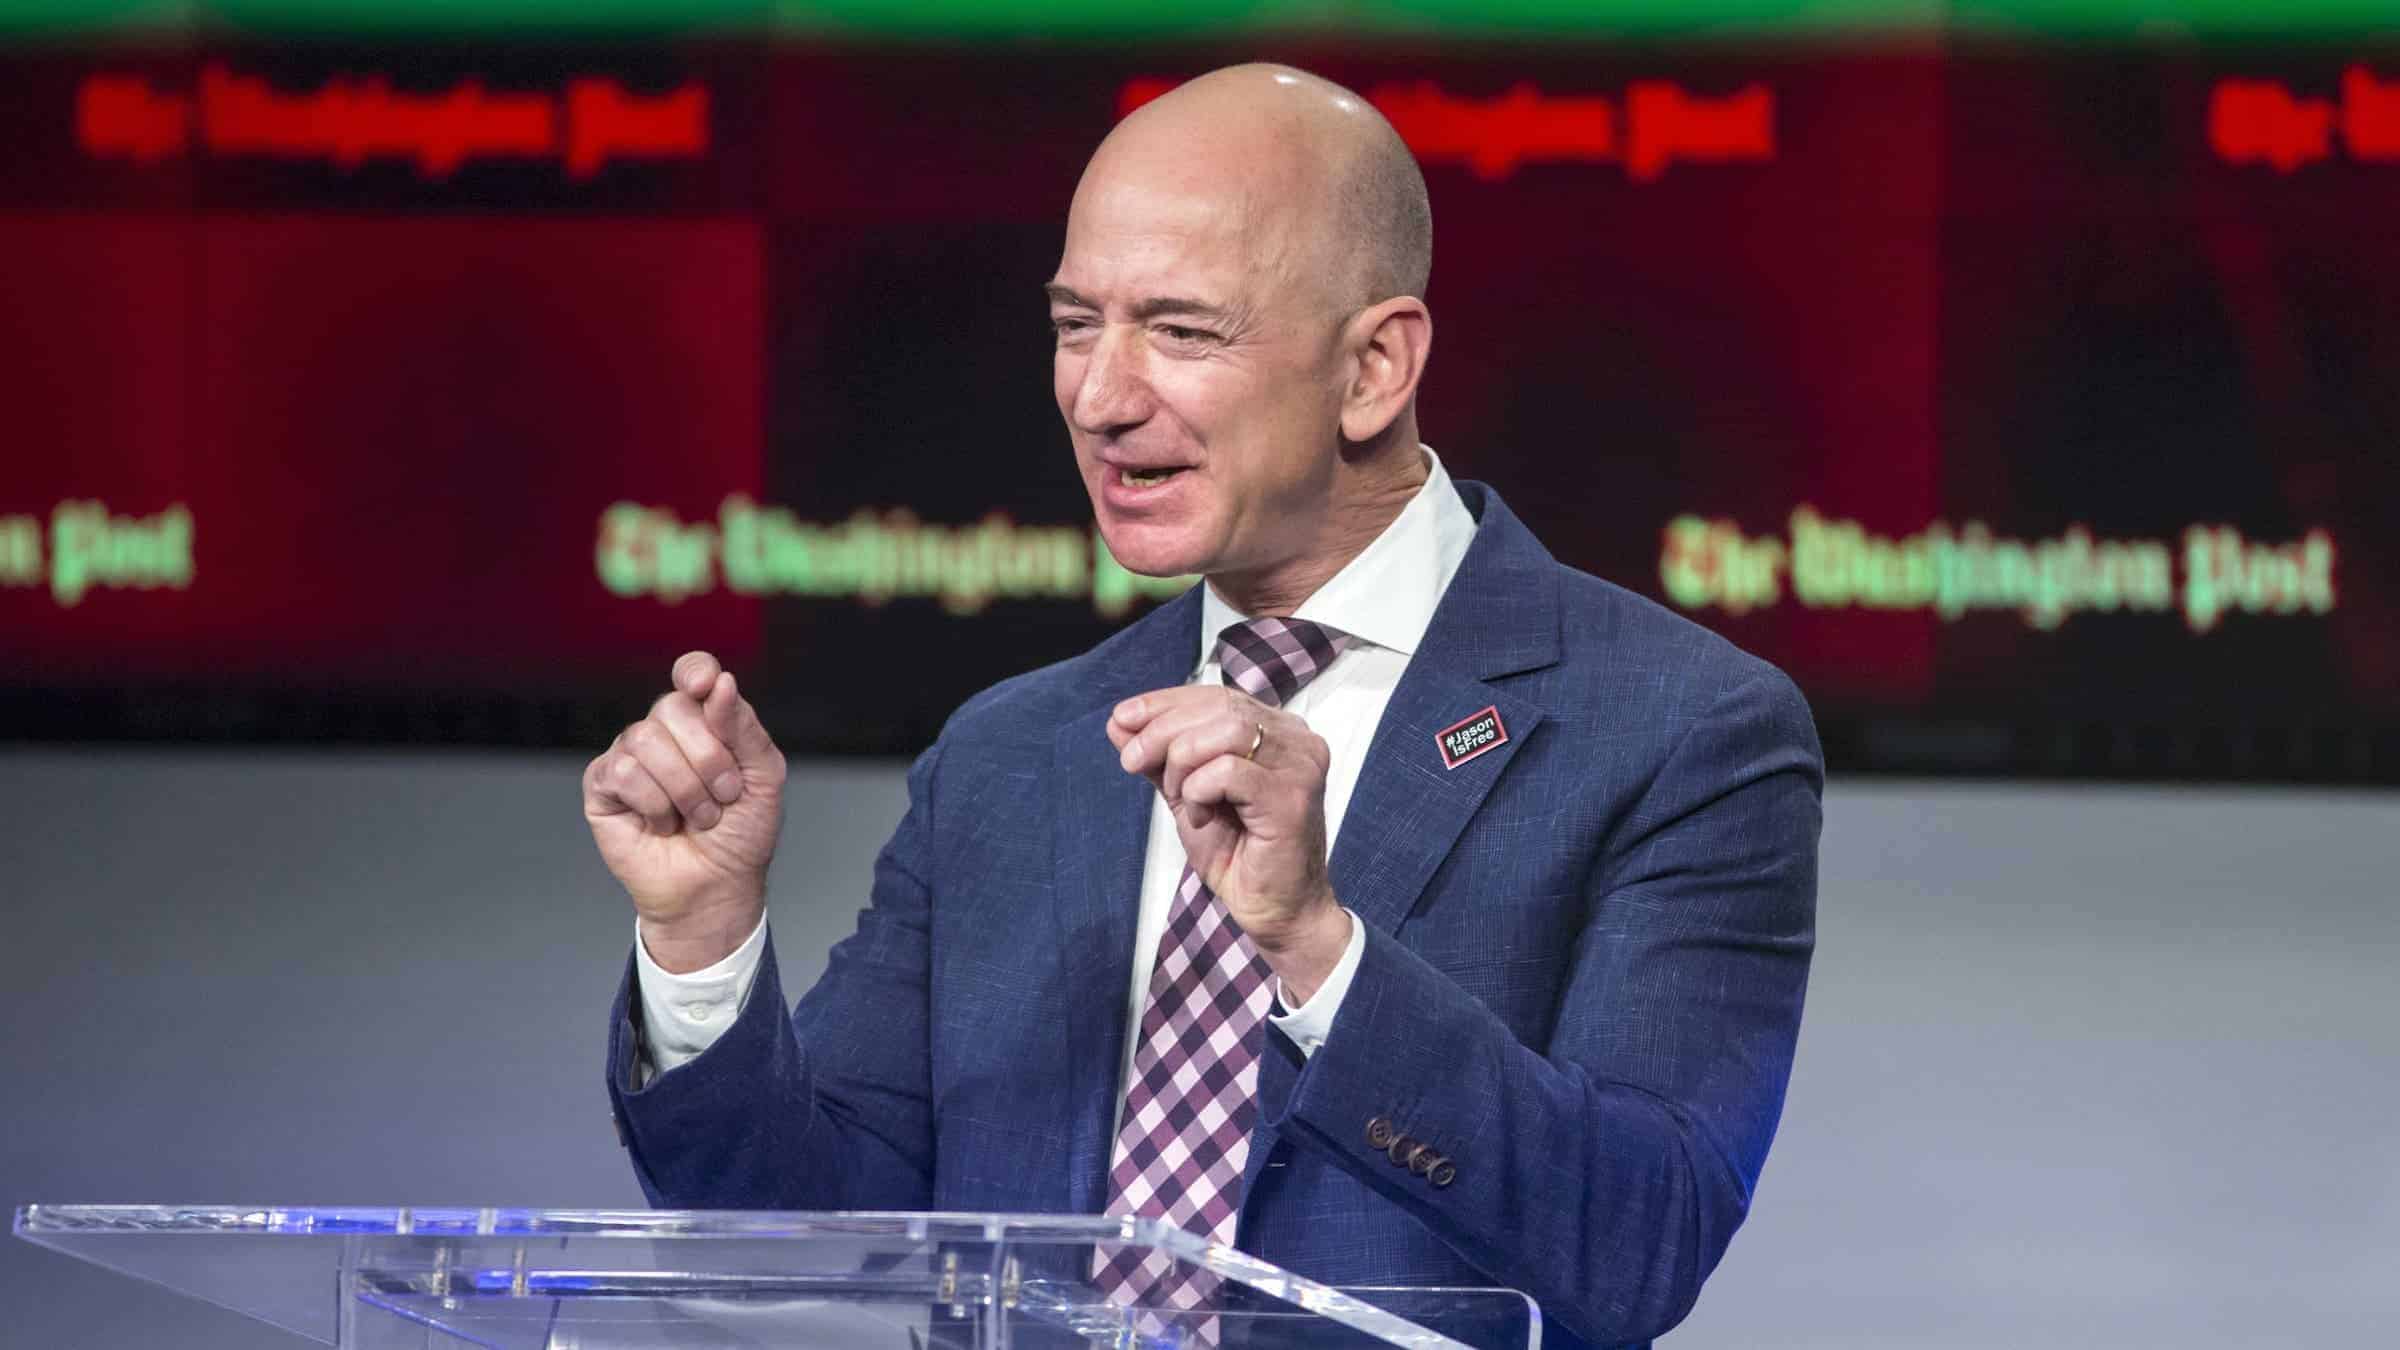 World hunger could be wiped out by 2030 with extra £8.5 billion a year – less than Jeff Bezos can earn in a day